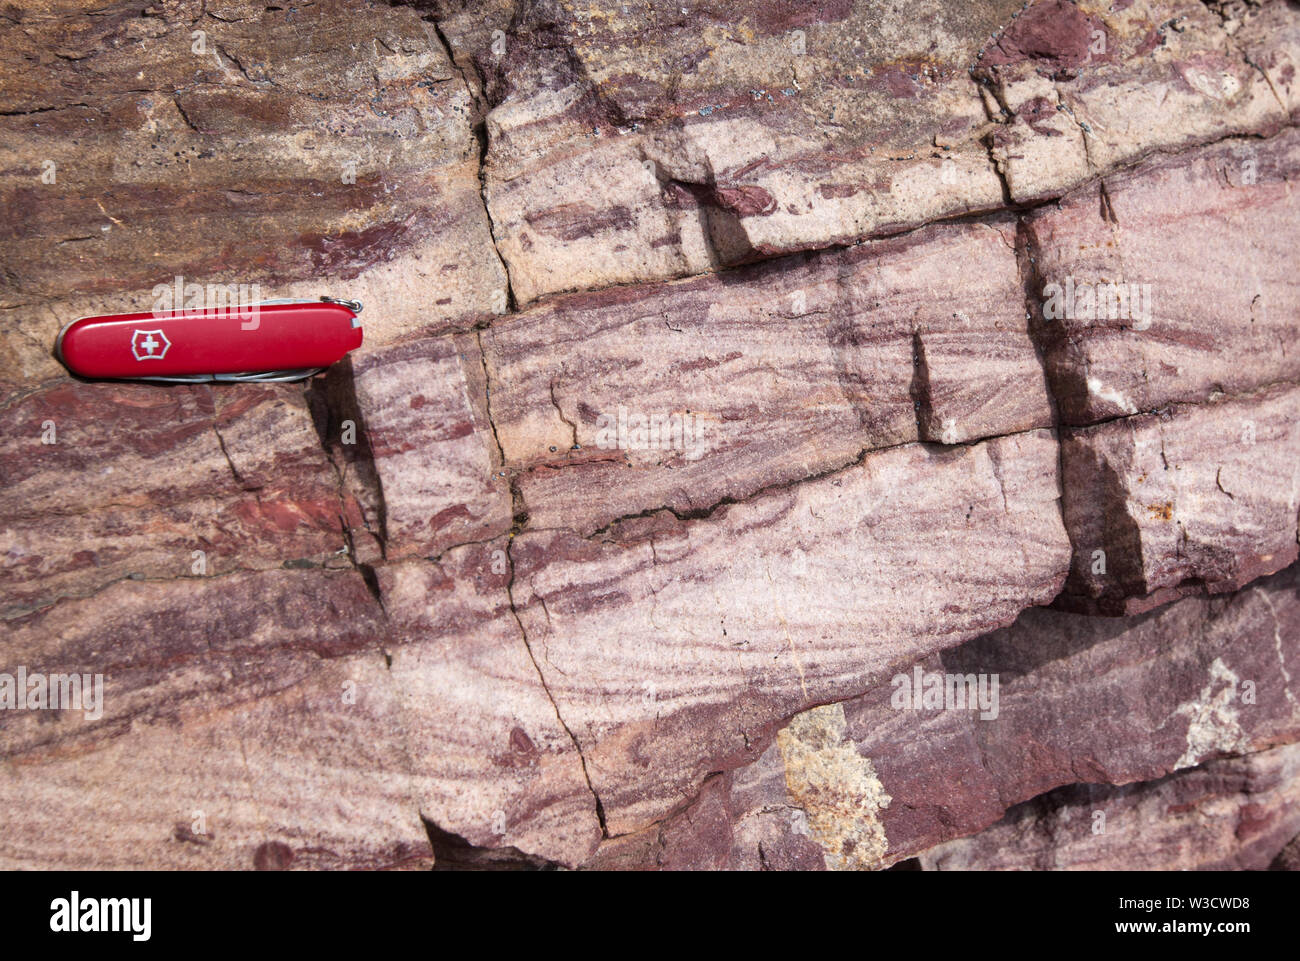 Cross-bedded Precambrian sandstone (quartzite) of the Grinnell Formation, part of the Belt Supergroup in Northern Montana, USA. Stock Photo